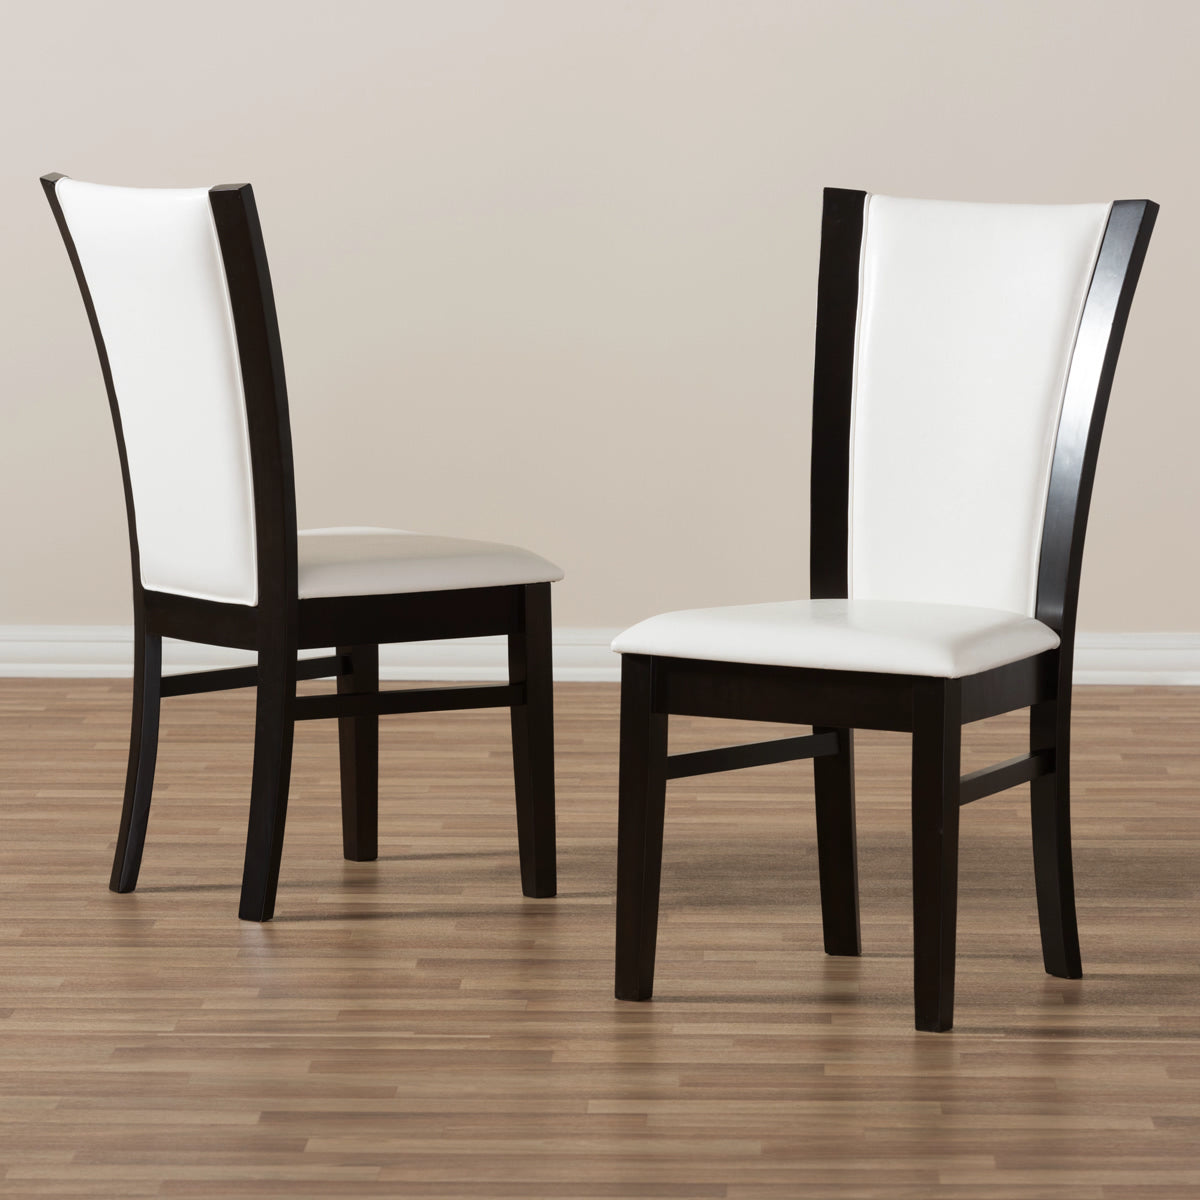 Baxton Studio Adley Modern and Contemporary Dark Brown Finished White Faux Leather Dining Chair (Set of 2) Baxton Studio-dining chair-Minimal And Modern - 6